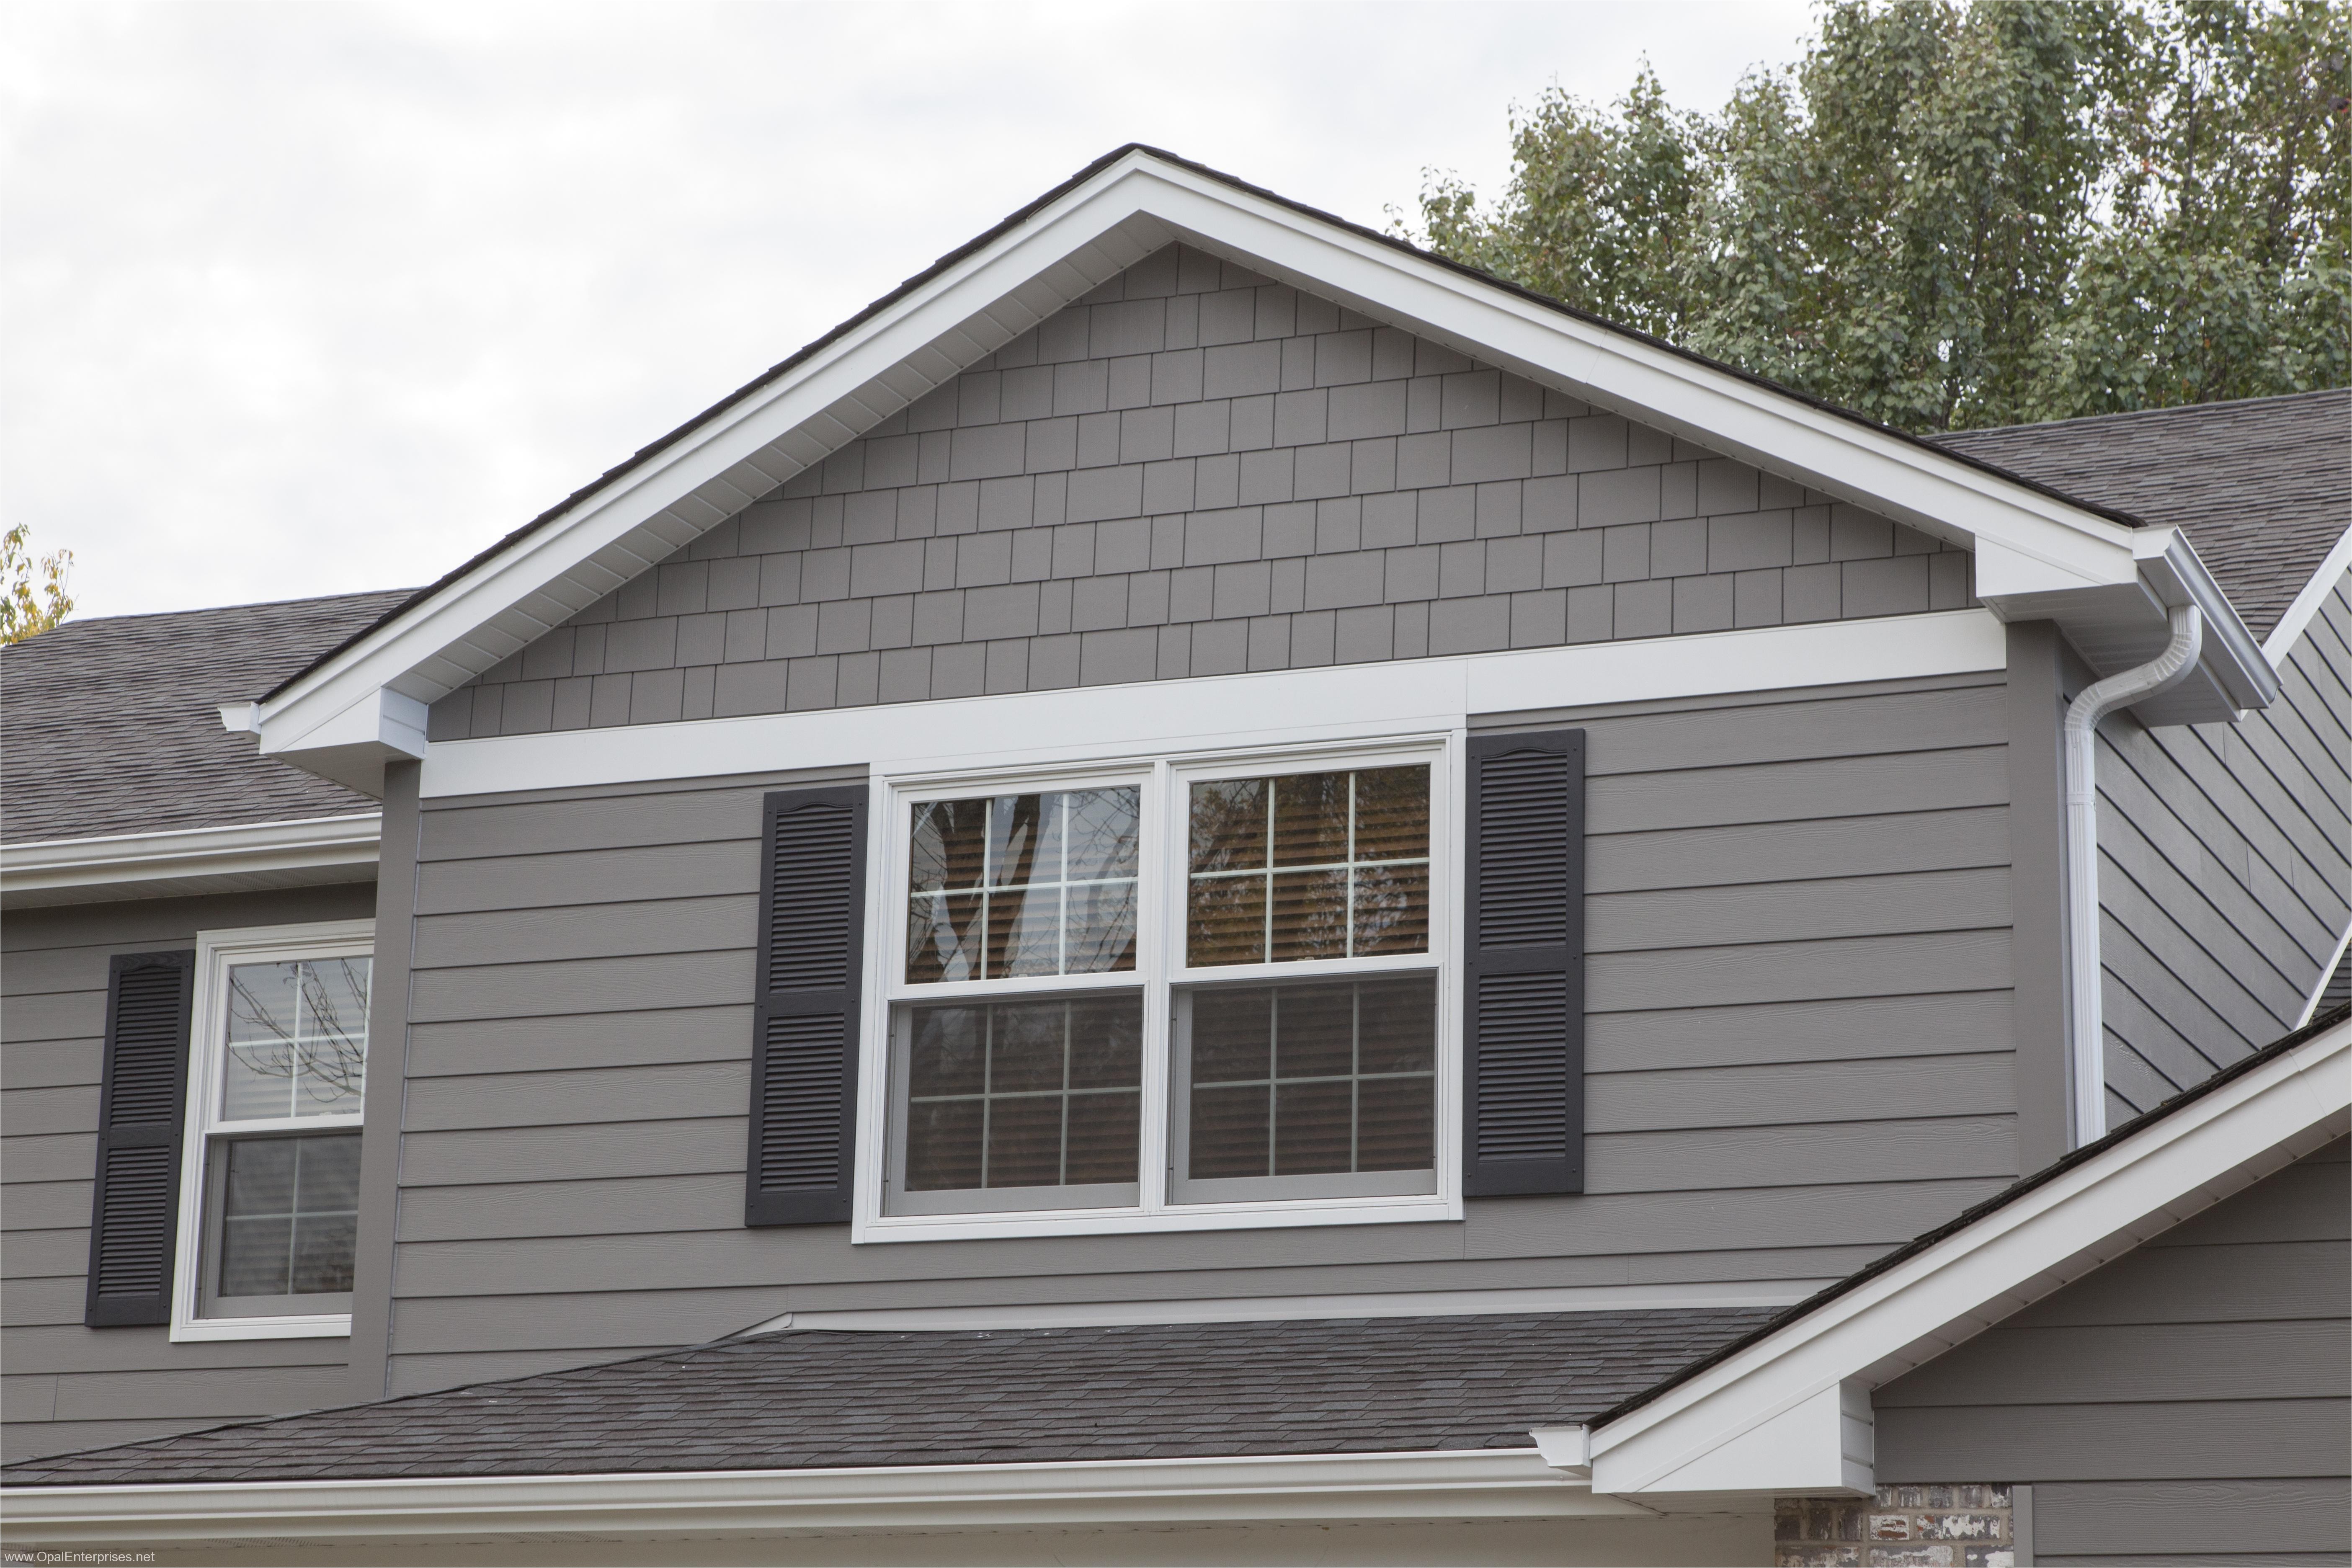 timeless beauty achieved with aged pewter james hardie siding